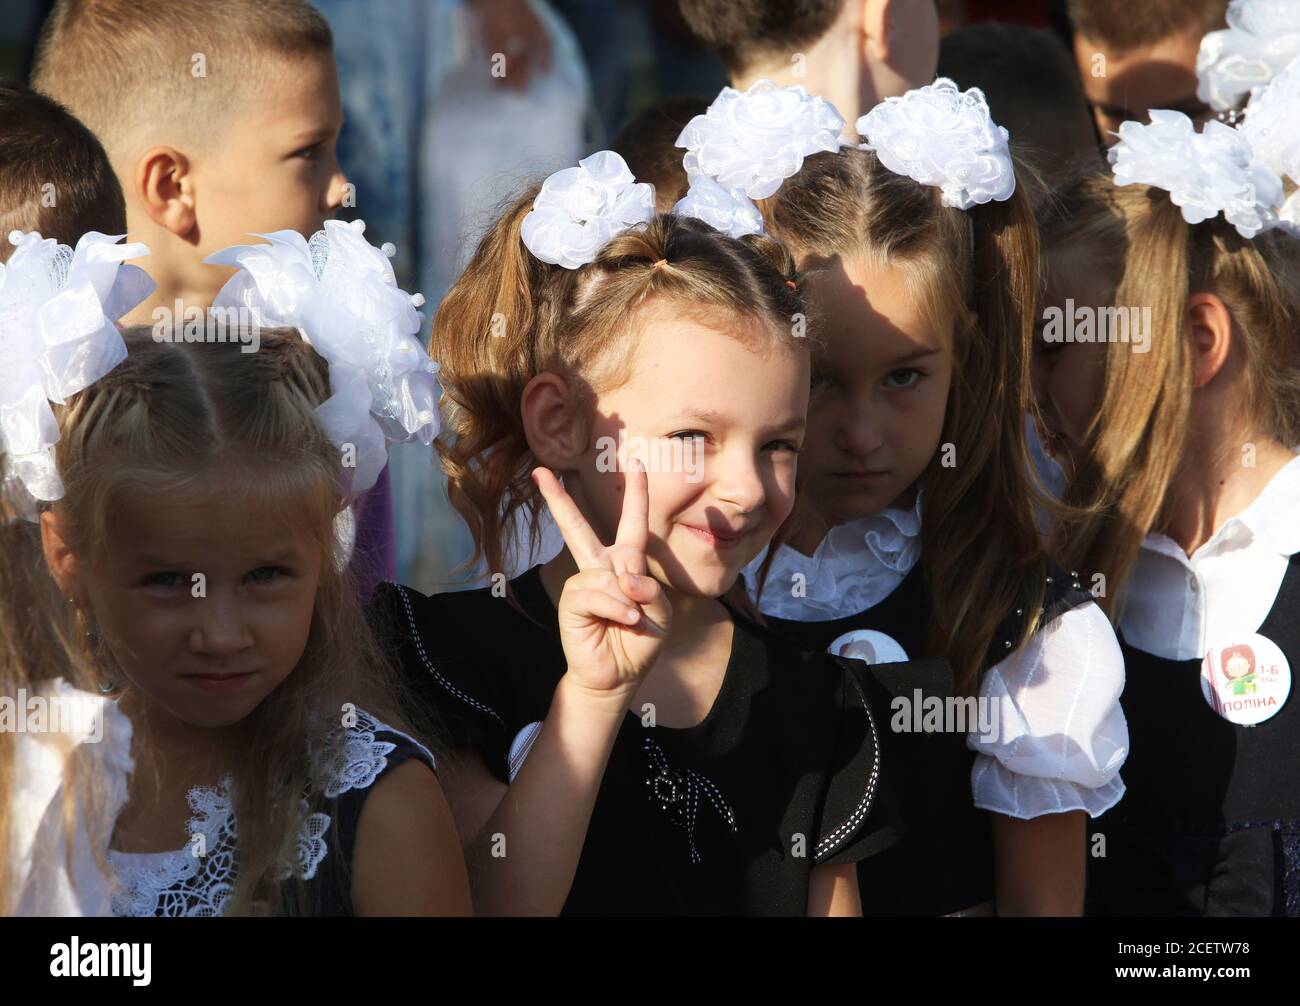 Kiev. 1st Sep, 2020. A girl gestures on her first day of school in Kiev Oblast, Ukraine, Sept. 1, 2020 Over 4.2 million students have resumed their studies in Ukraine, including 428,000 first-graders, as the country marks the start of the new school year. Children from the 21 cities and districts in 'red' quarantine zones will not return to school in person, instead studying remotely until the epidemiological situation changes. Credit: Sergey Starostenko/Xinhua/Alamy Live News Stock Photo